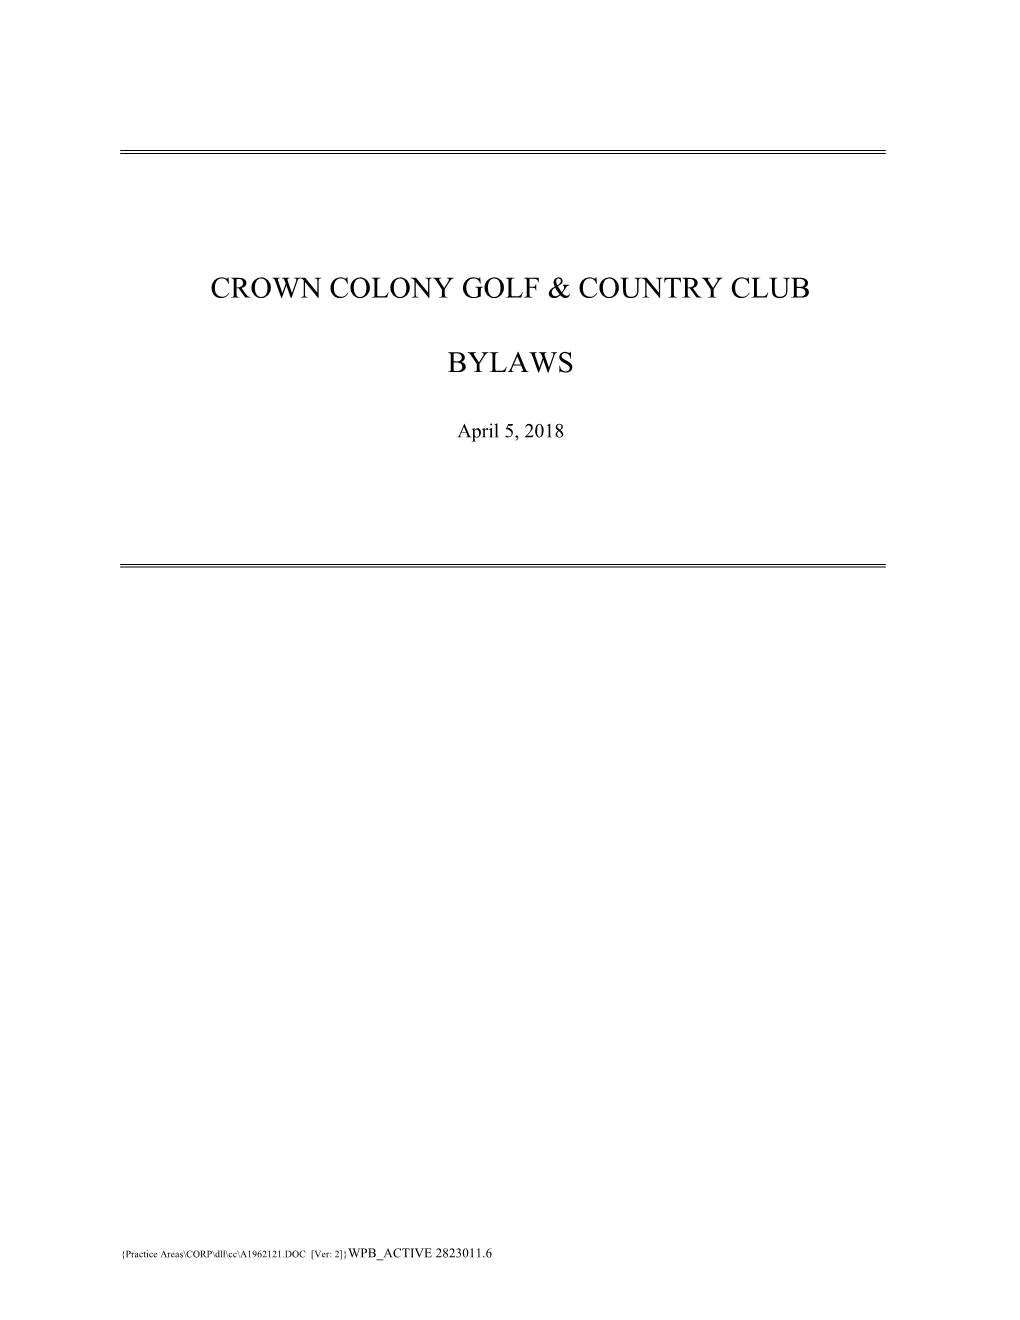 Crown Colony Golf & Country Club